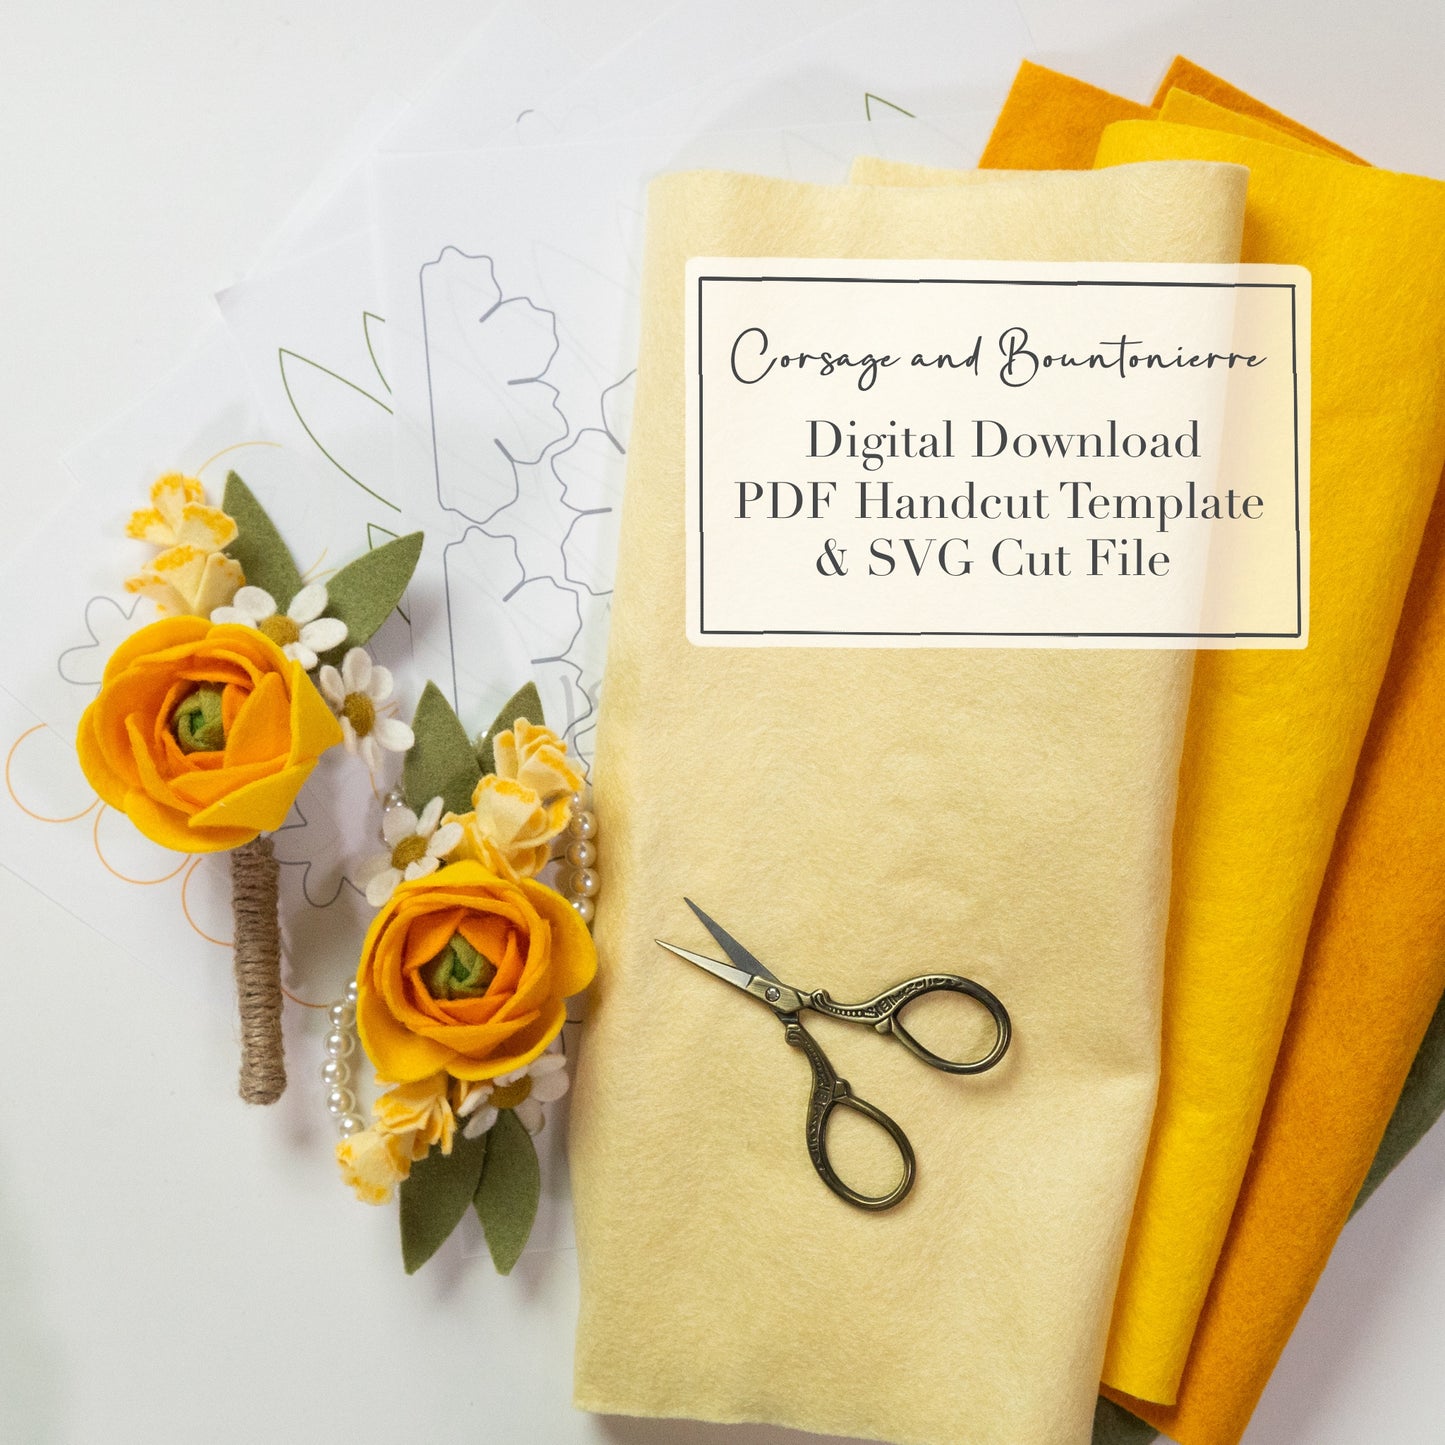 Corsage and Boutonnière PDF and SVG Digital Download